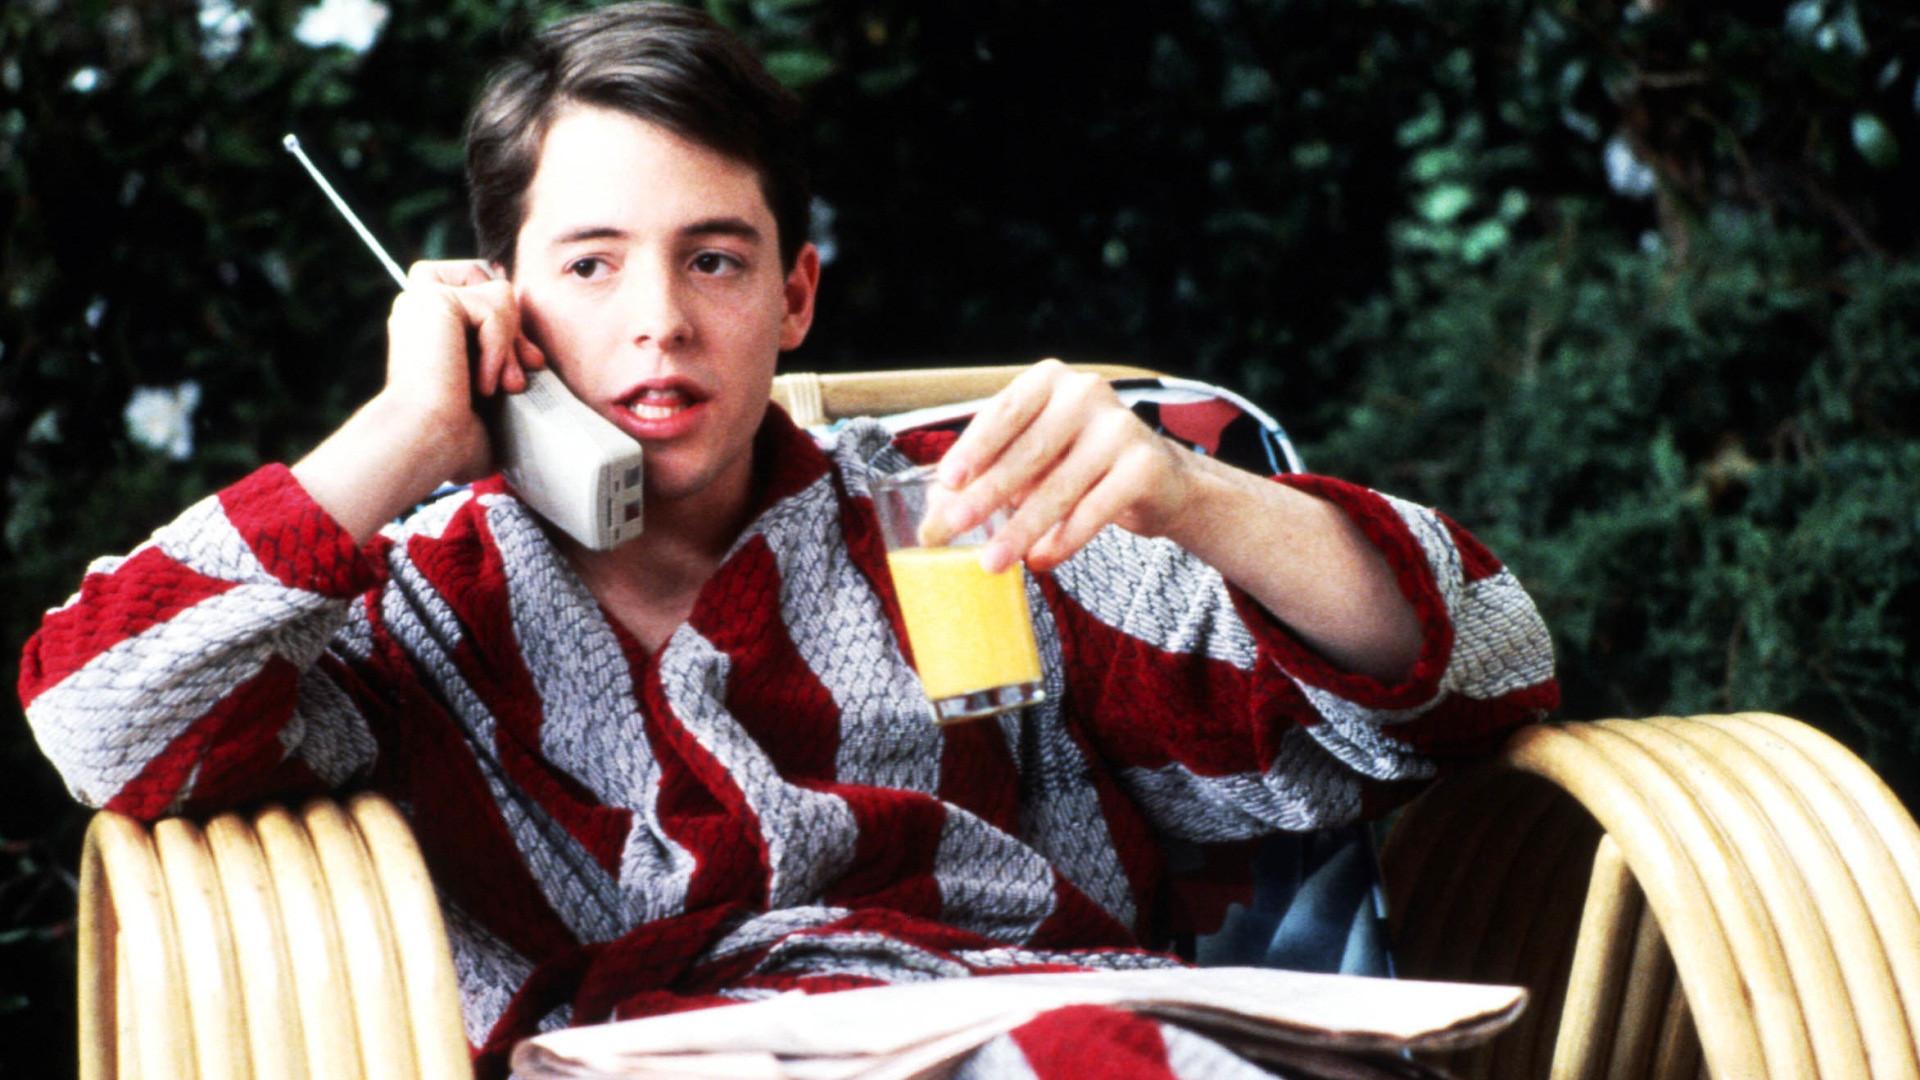 Revisiting: Ferris Bueller's Day Off (1986)